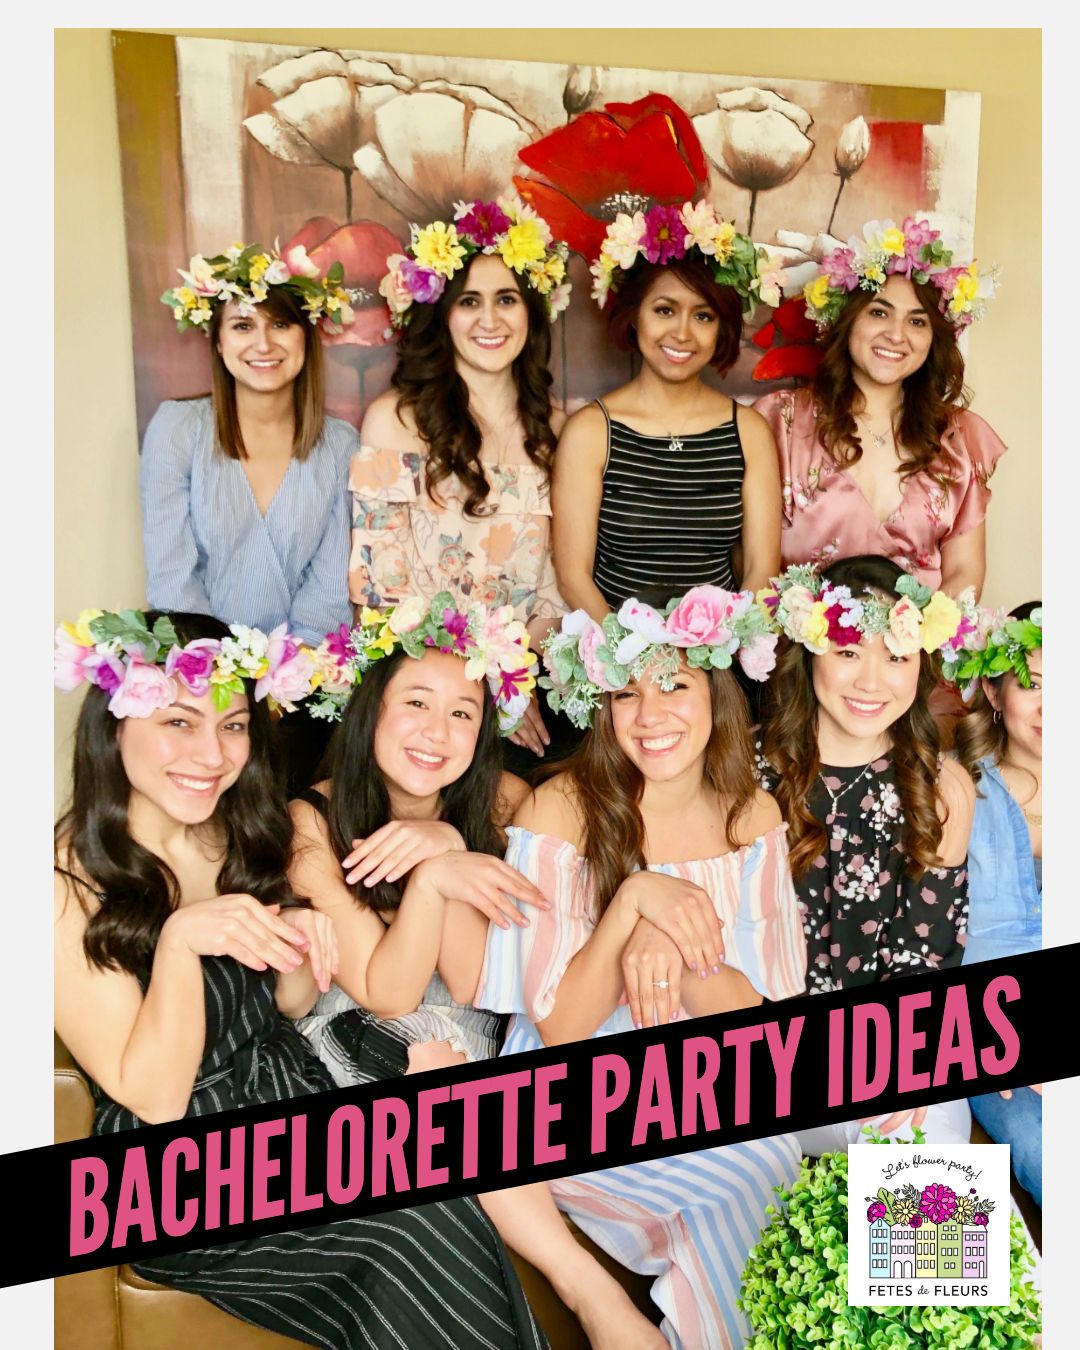 How To Spend A Girly Austin Bachelorette Party Or Austin Girls Weekend If You Like Pretty Things Austin Bachelorette Party Austin Bachelorette Bachelorette Party Weekend